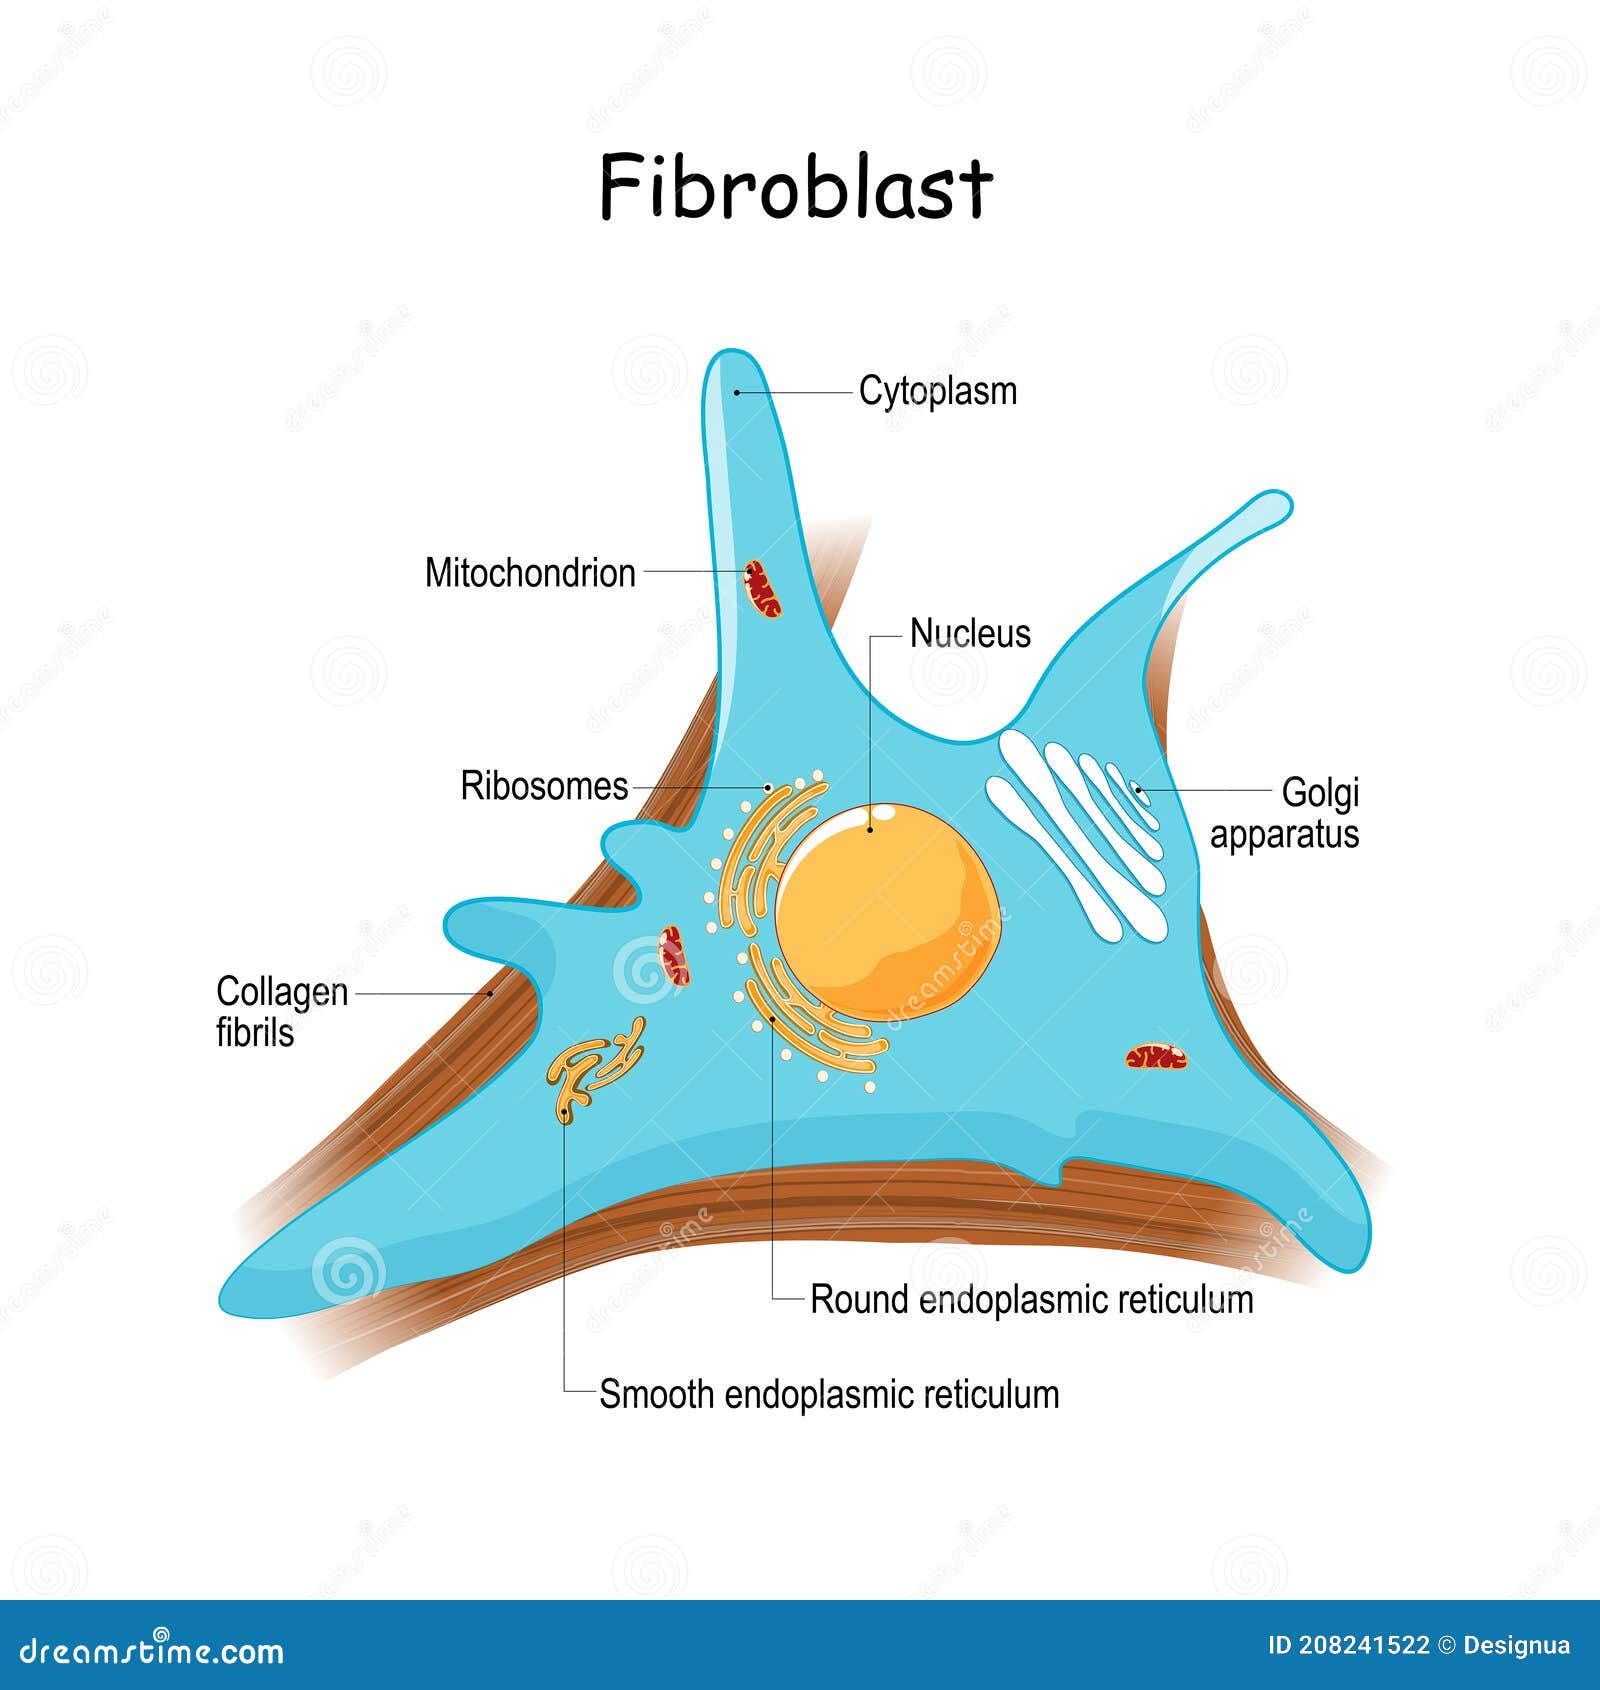 fibroblast anatomy. close-up with collagen fibrils, and organelles